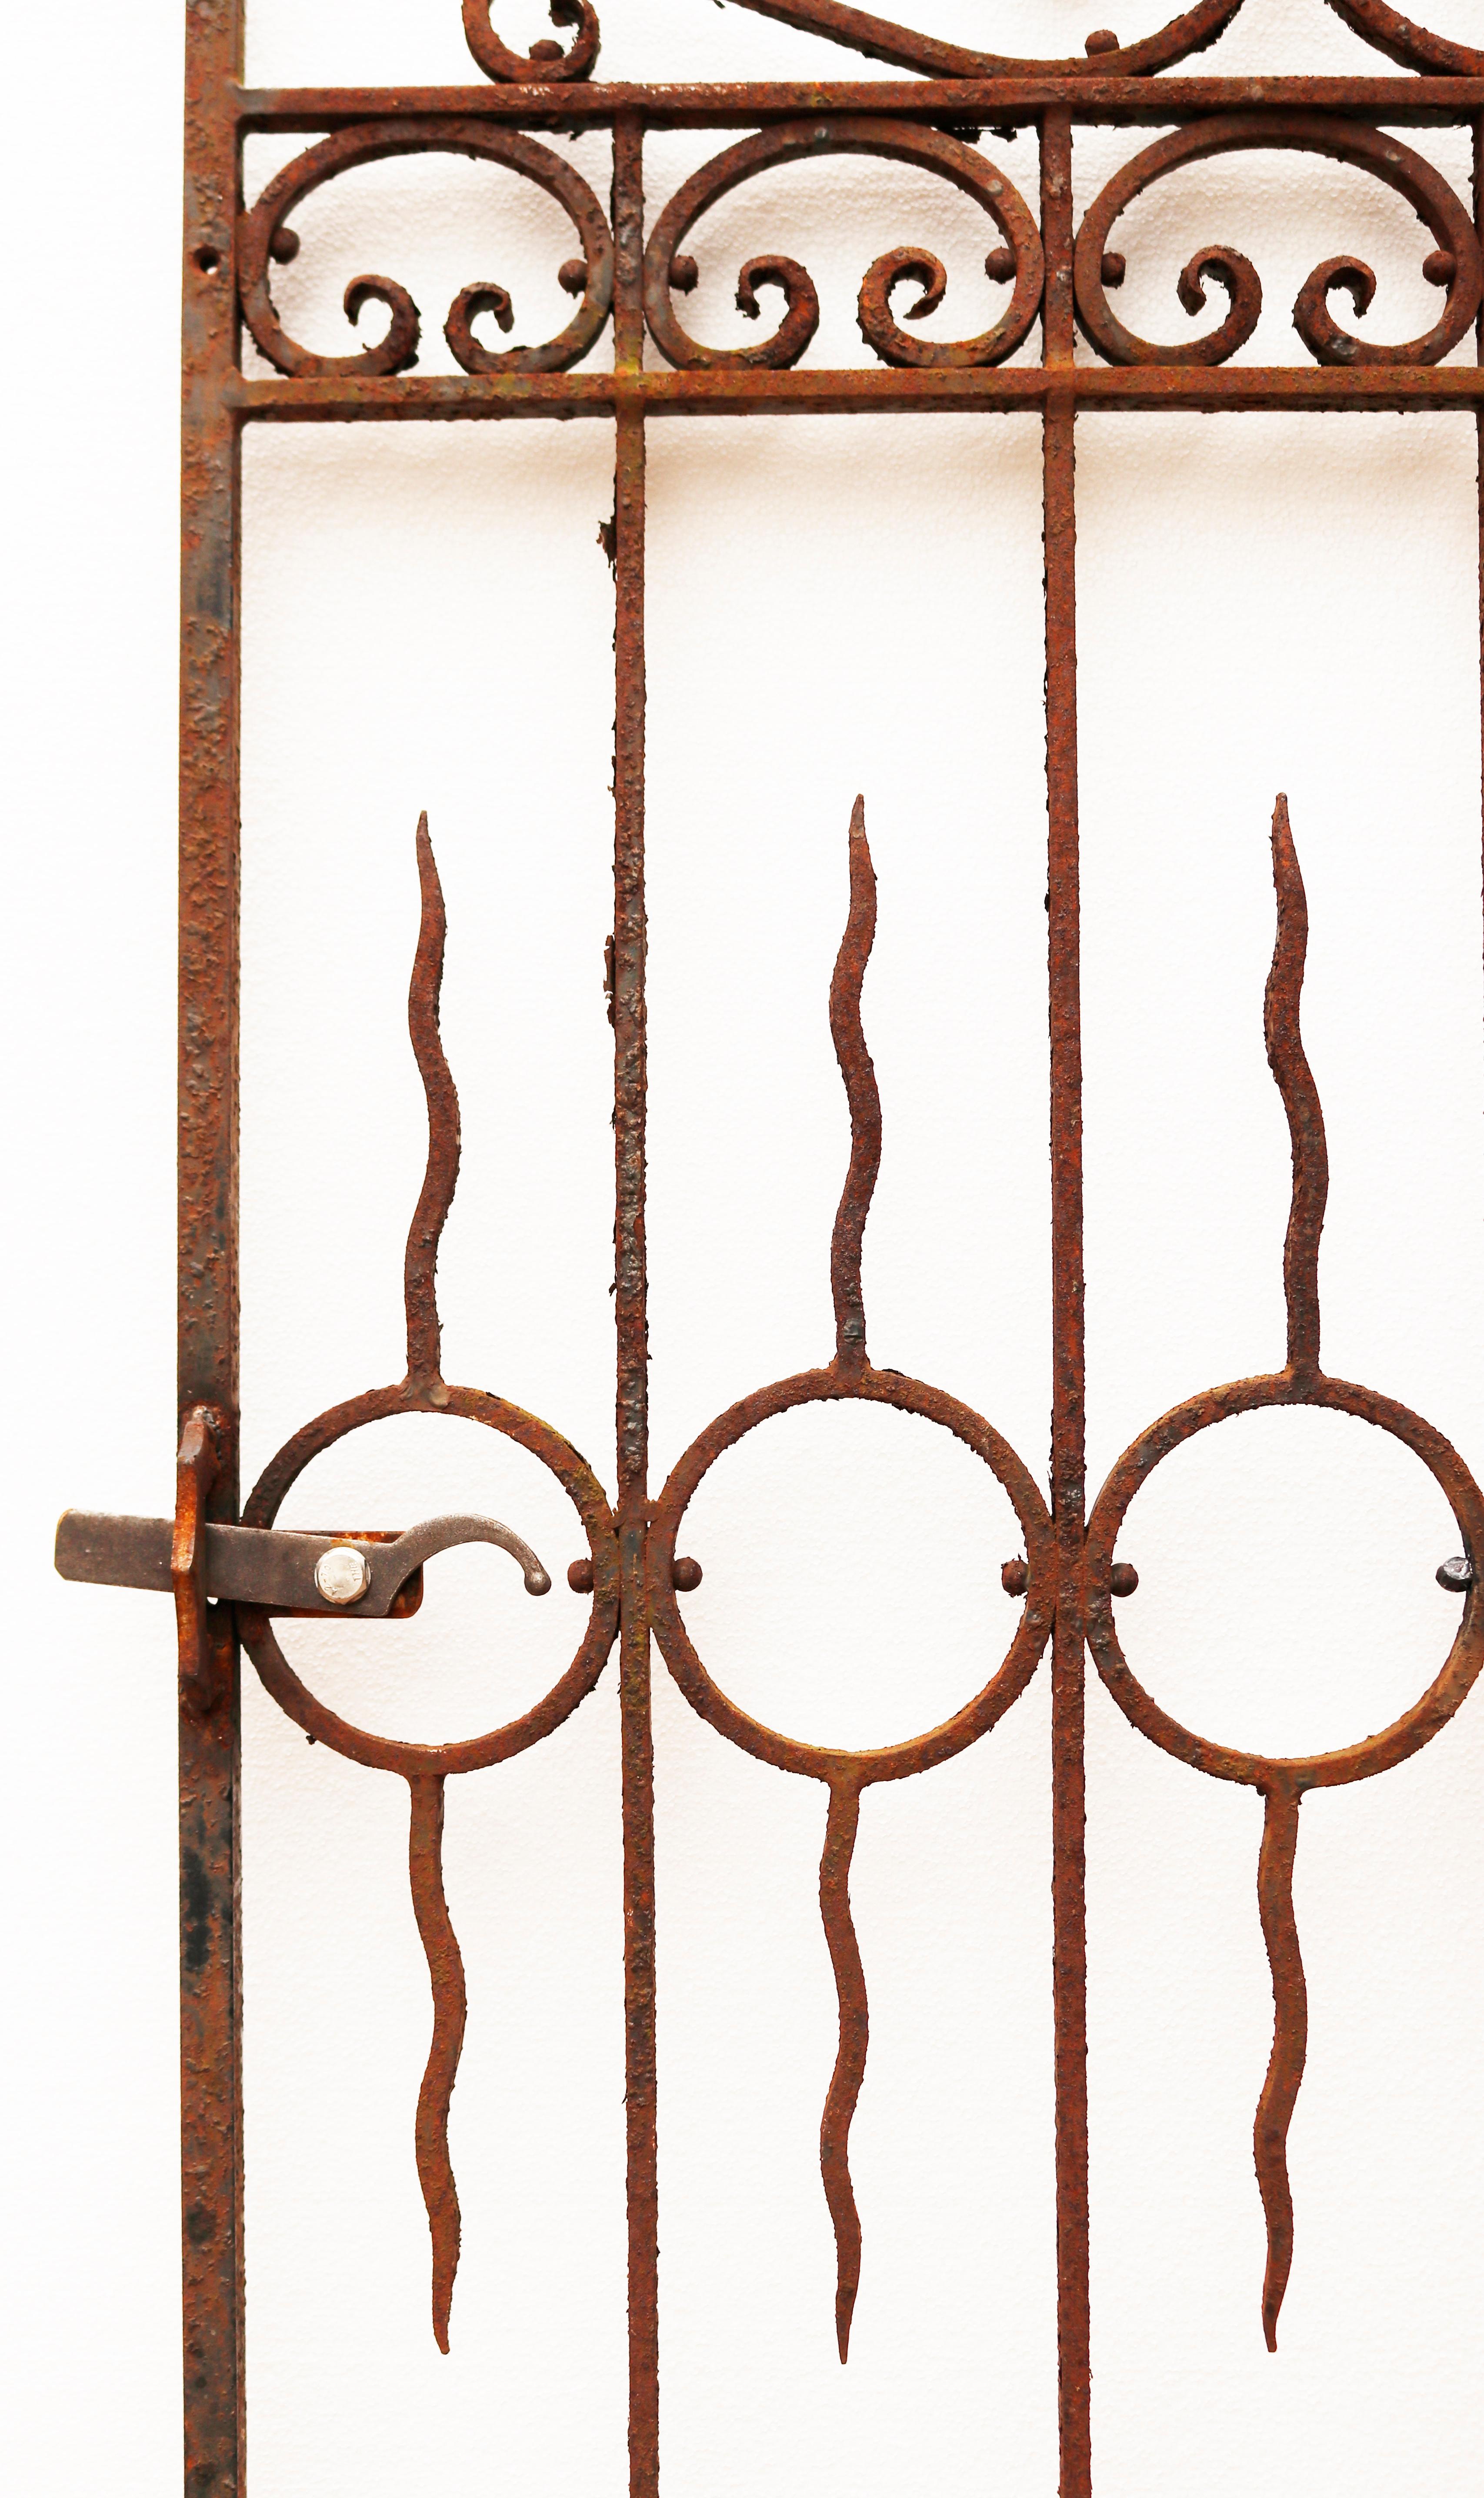 Reclaimed Wrought Iron Victorian Style Gate In Good Condition For Sale In Wormelow, Herefordshire